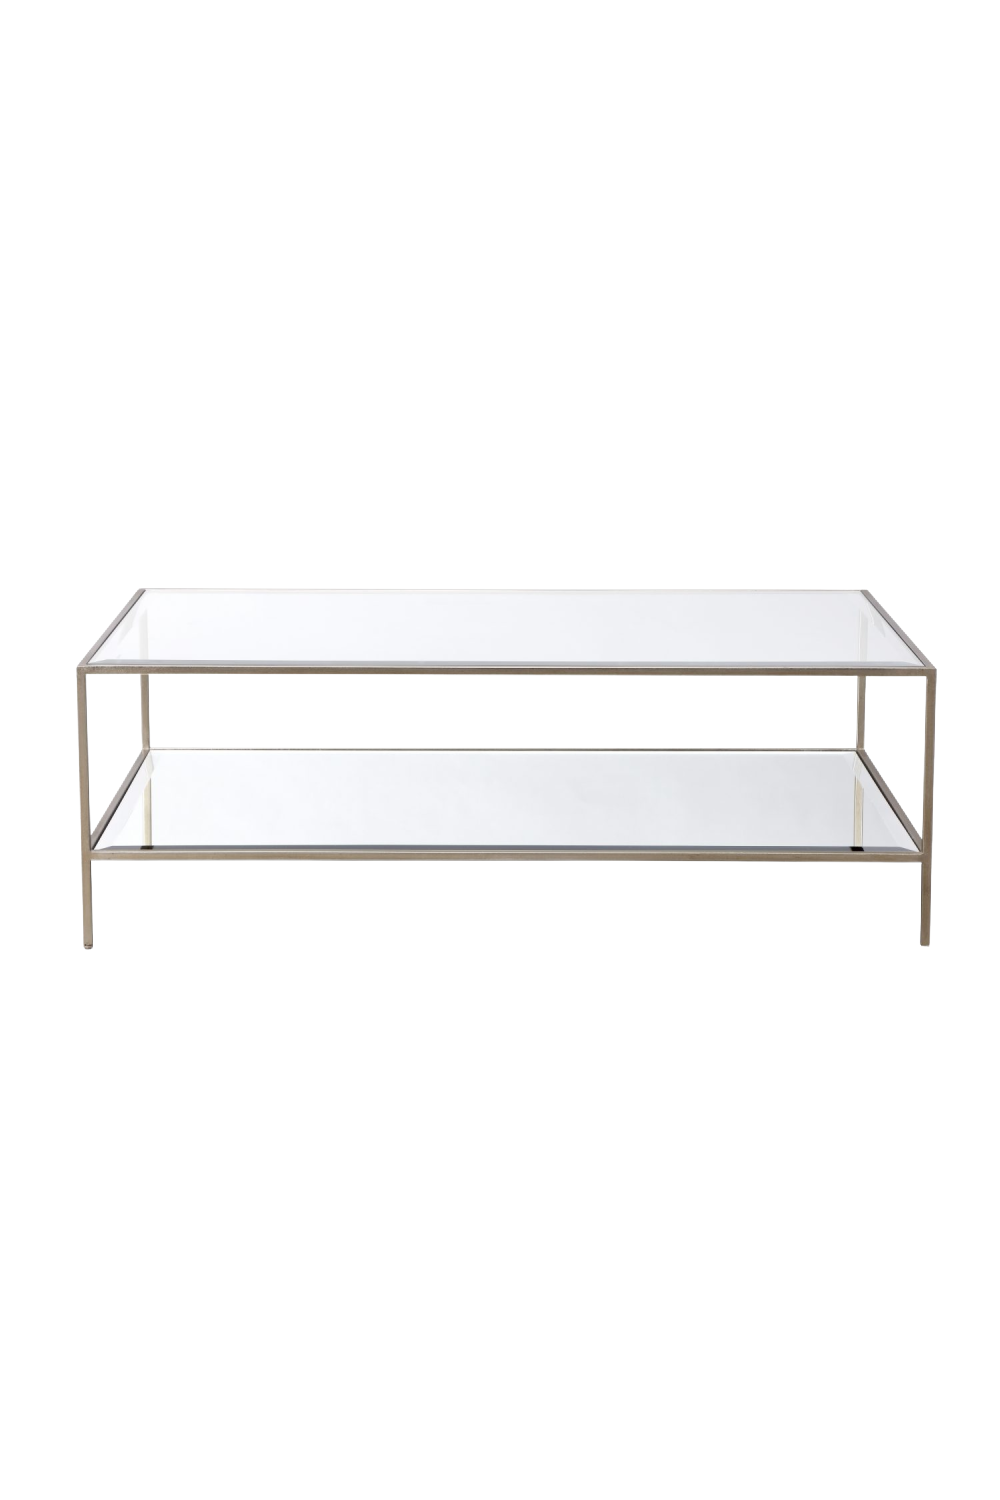 Two-Tier Silver Glass Coffee Table | Liang & Eimil Oliver | OROA.com